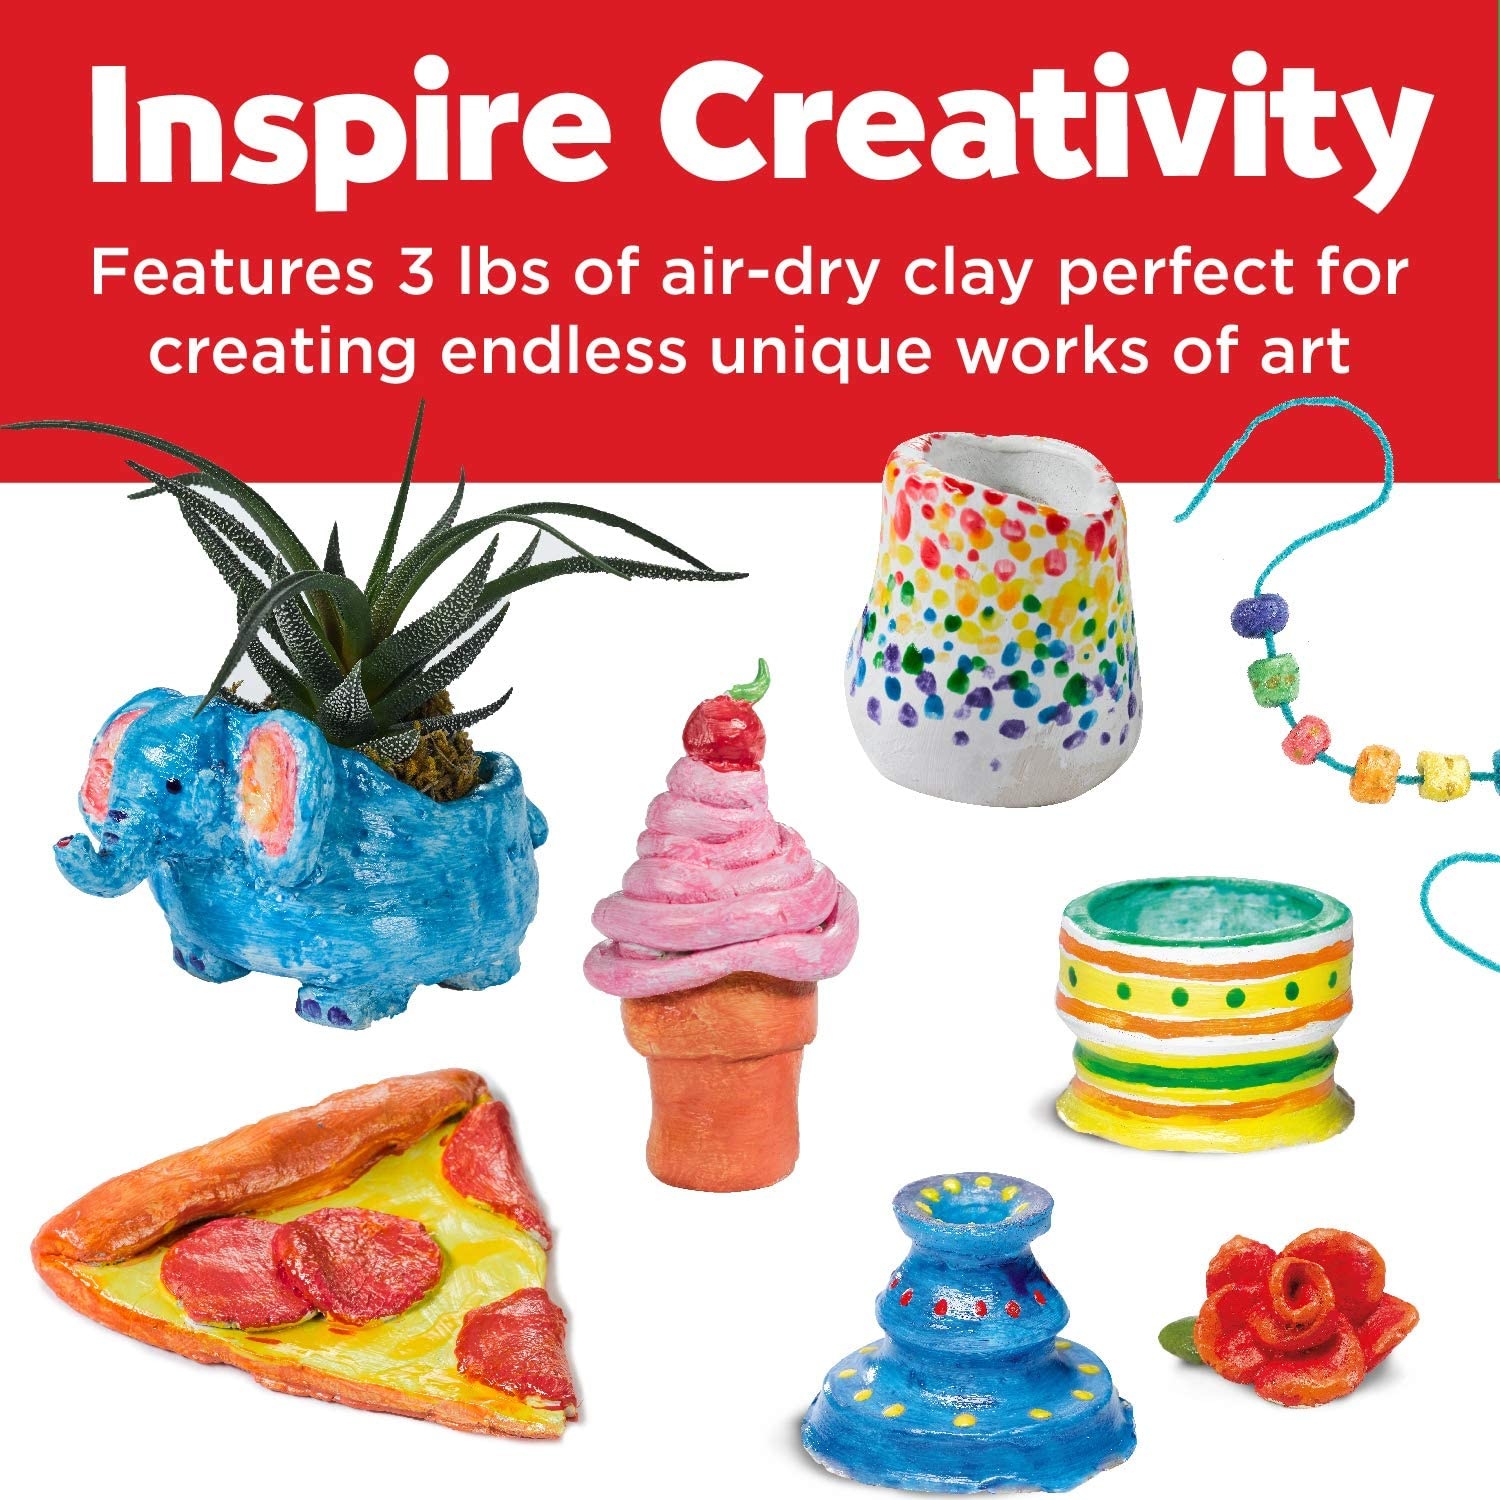 Pottery Wheel for Kids: Faber-Castell Pottery Studio – Faber-Castell USA